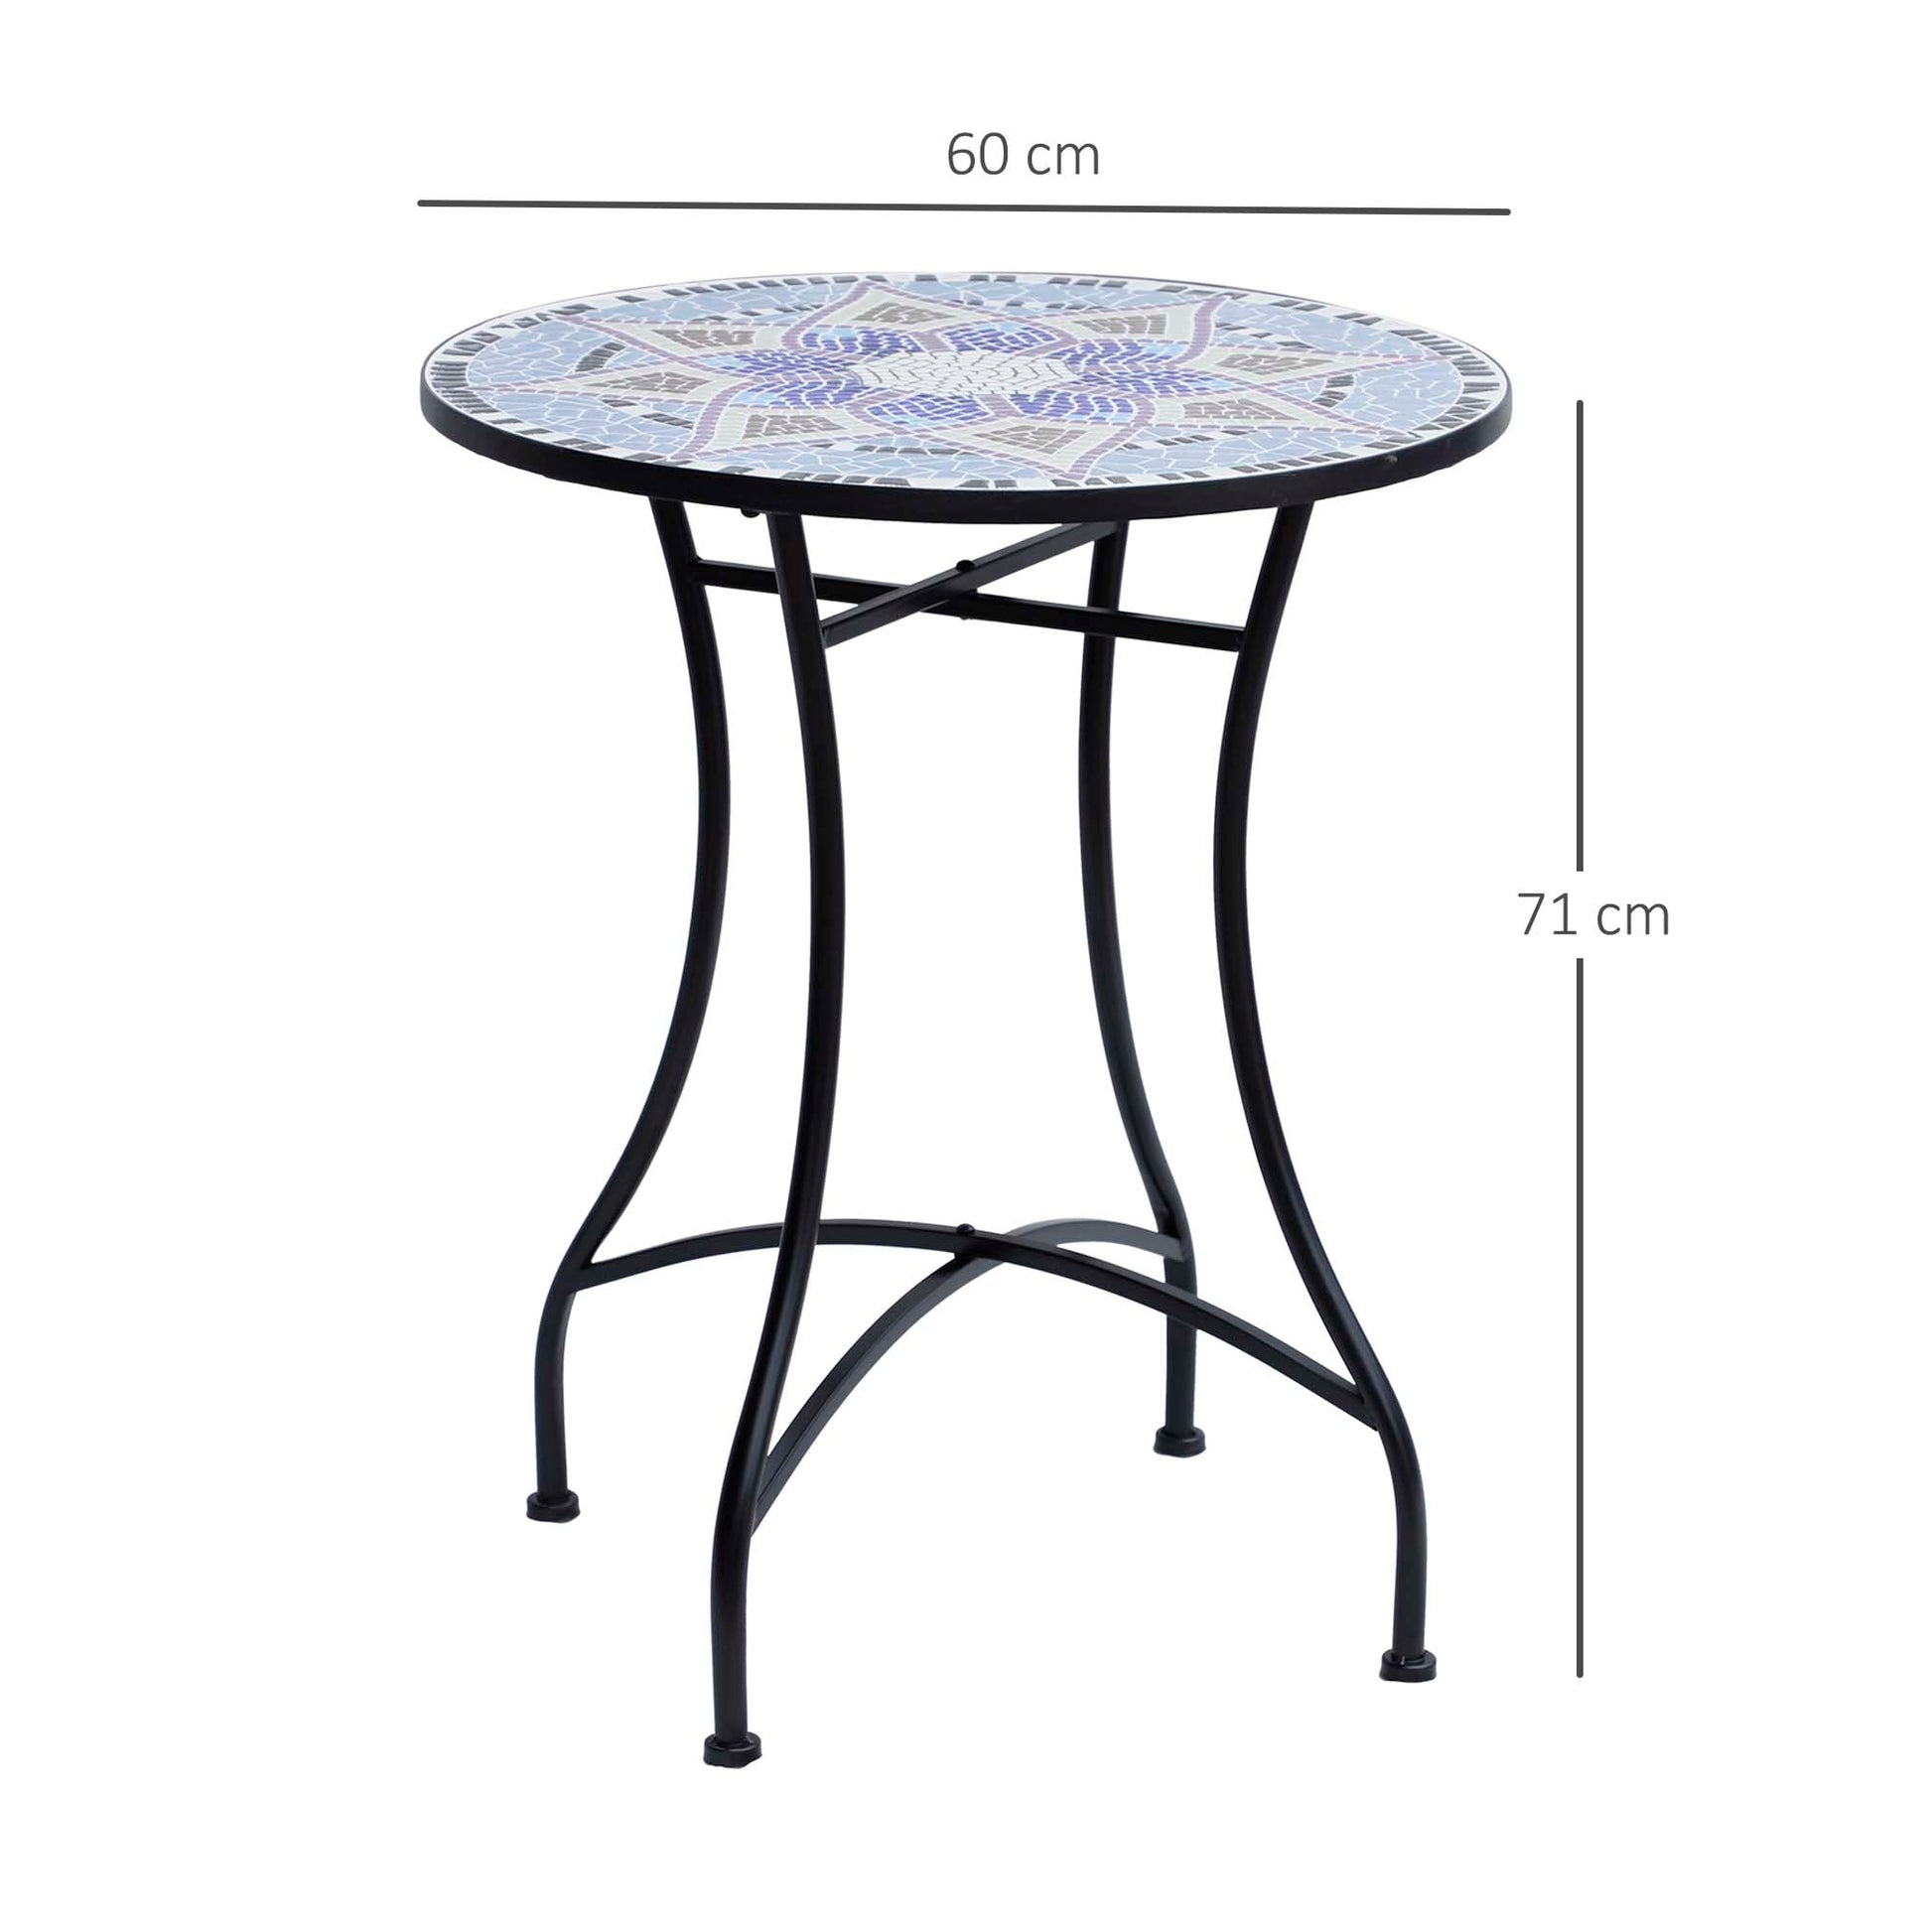 Outdoor Mosaic Round Garden Table, Patio Bistro Coffee Table with 60cm Ceramic Top, Side Table, Blue and White, Outsunny, 3